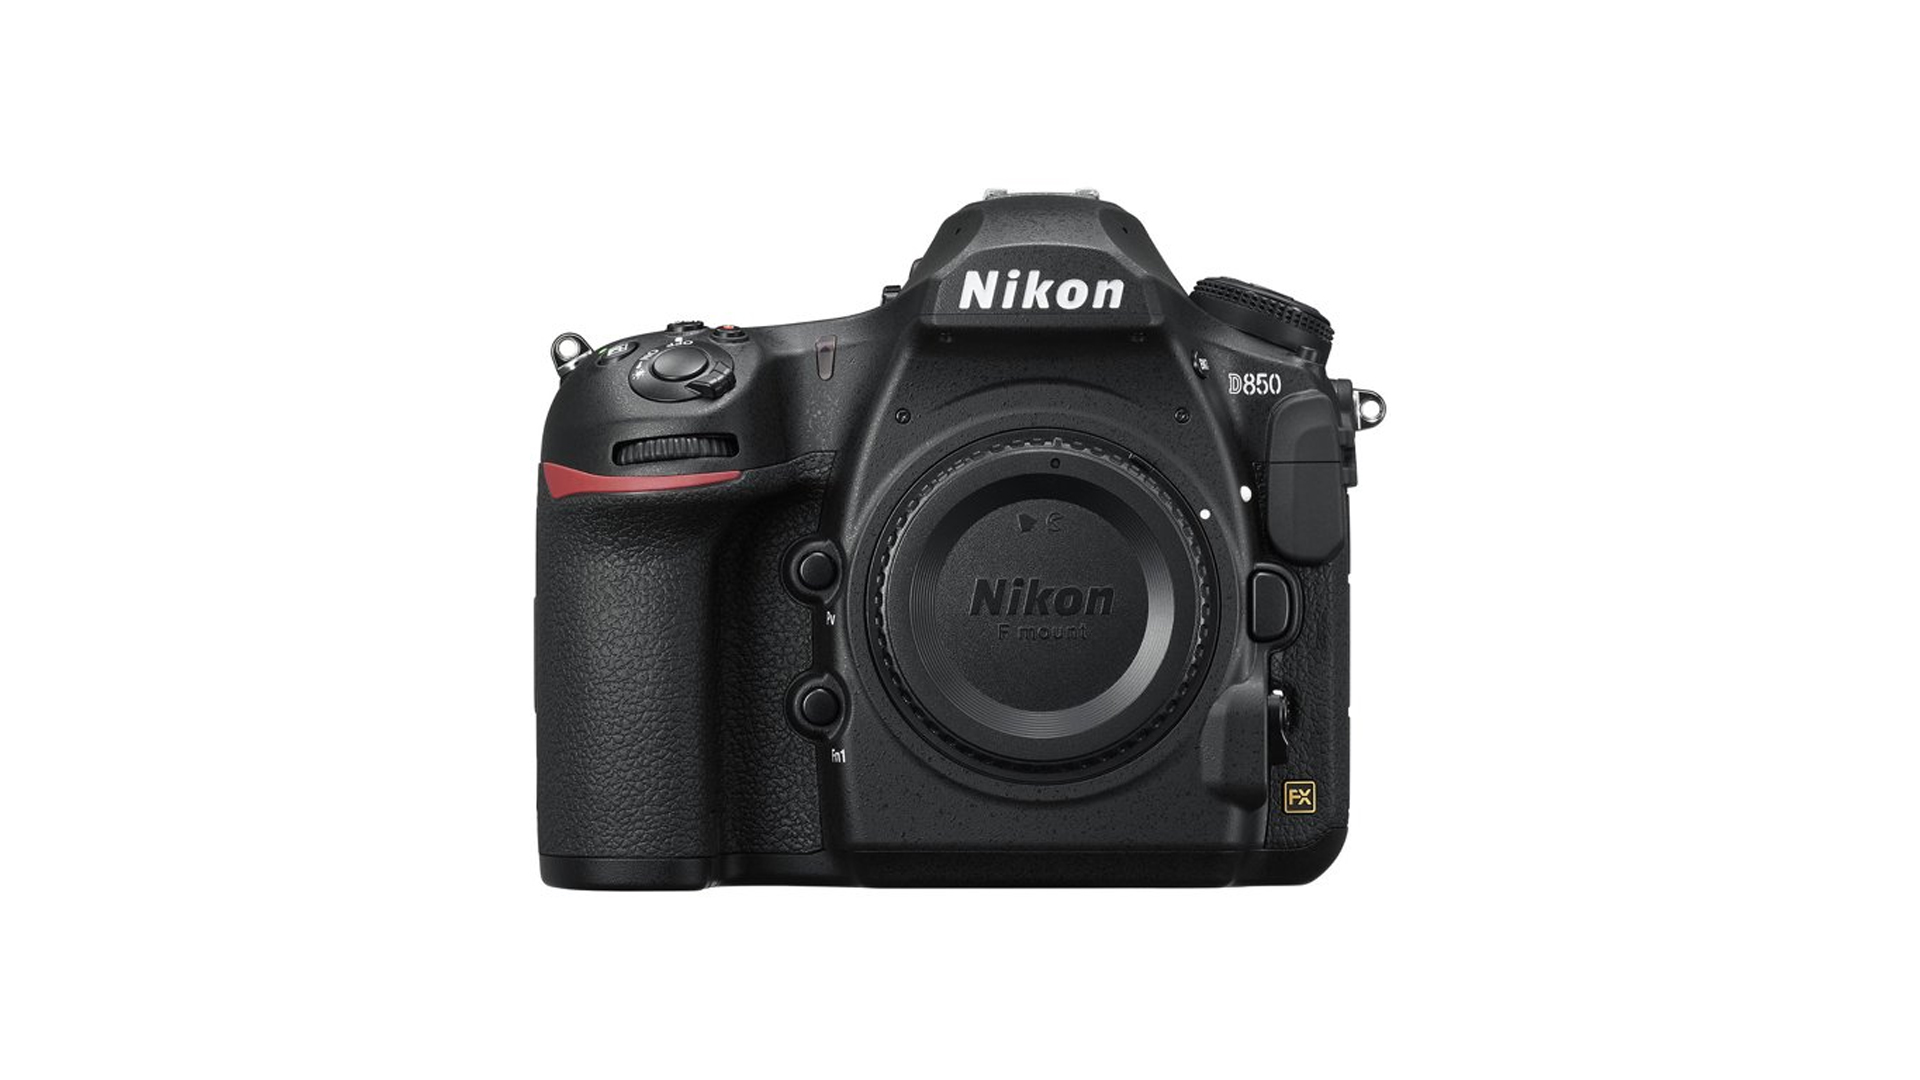 Nikon D850: Best for all-round performance day or night